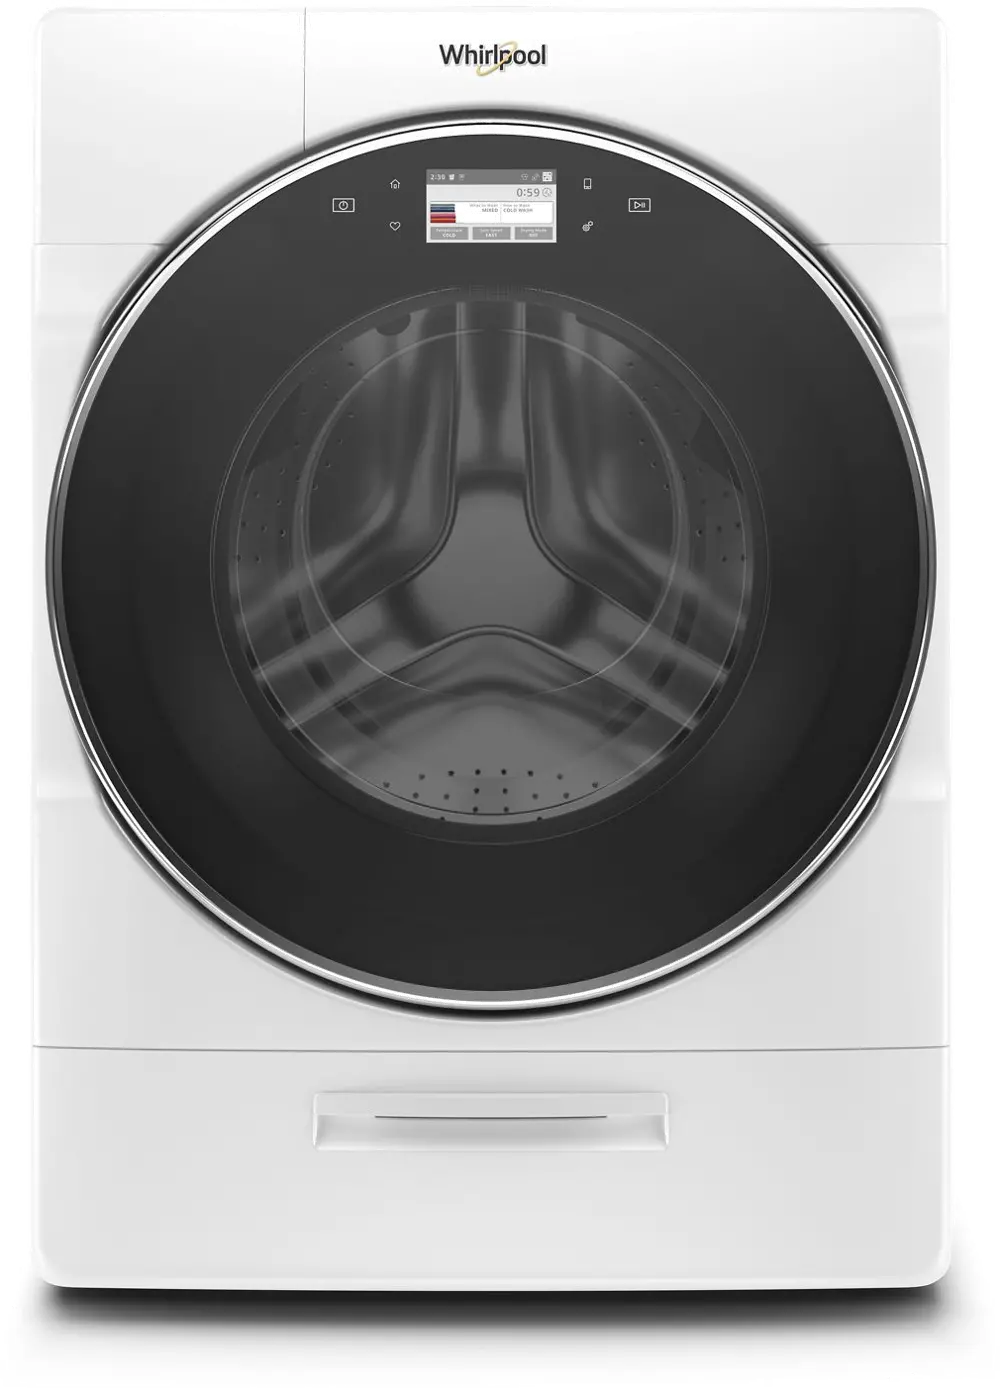 WFW9620HW Whirlpool Smart Front Load Washer with Load & Go XL Plus Dispenser - 5.0 cu. ft. White-1